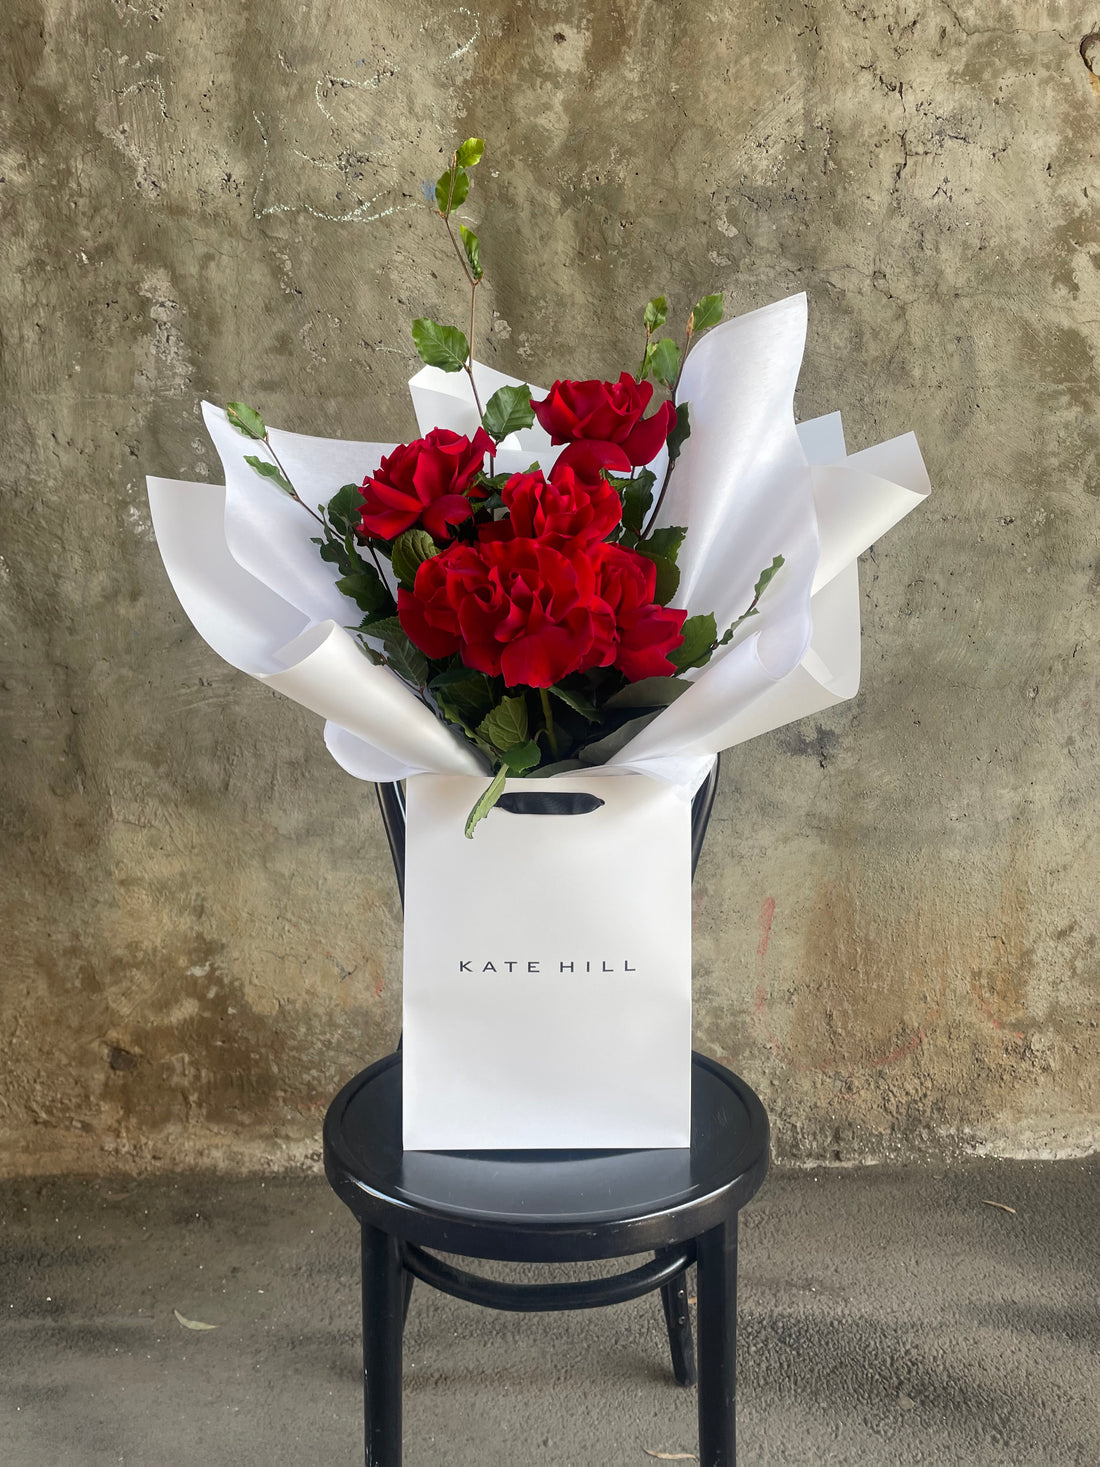 Simple red rose bouquet displaying 6 stems of red reflexed roses. Valentines day or Romance gift bouquet presented in our Kate Hill Flower Bag. Red rose bouquet bag sitting on a black bentwood chair with white background.